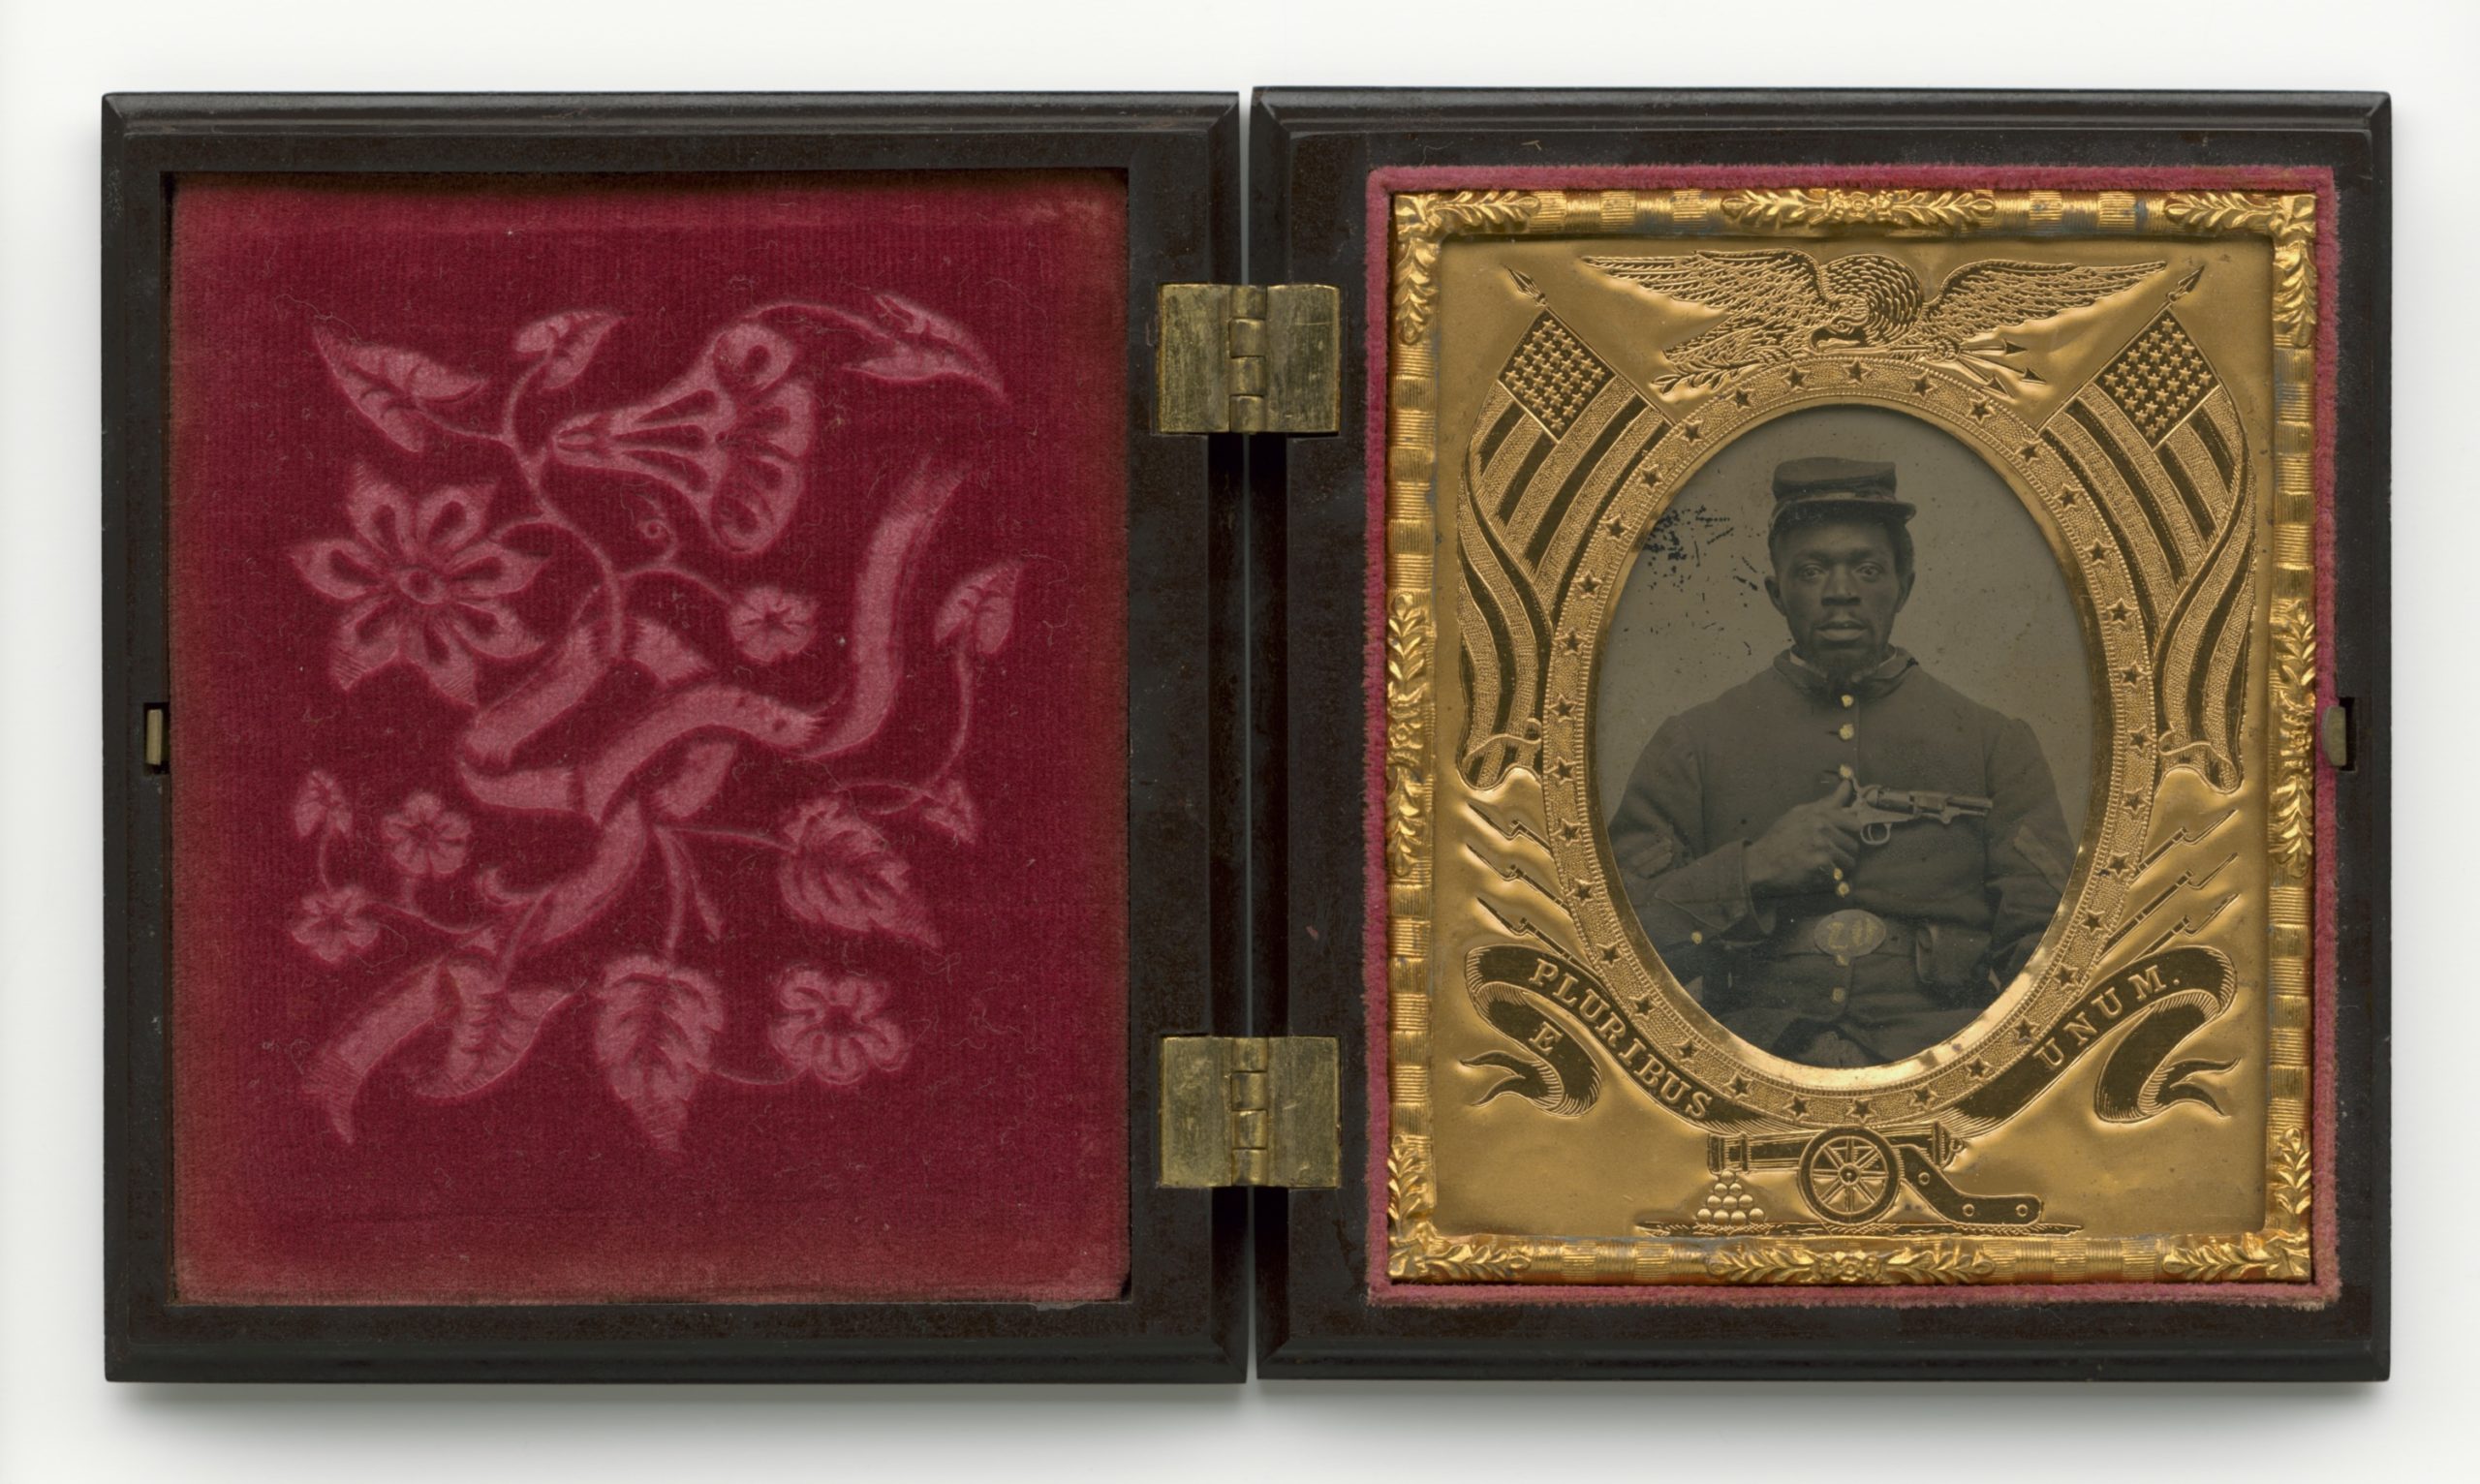 Hand-colored tintype with cover glass of an unknown Black U.S. soldier, in black thermoplastic case with brass hinges and red velvet liner, c. 1861-65 (Smithsonian National Museum of African American History and Culture)